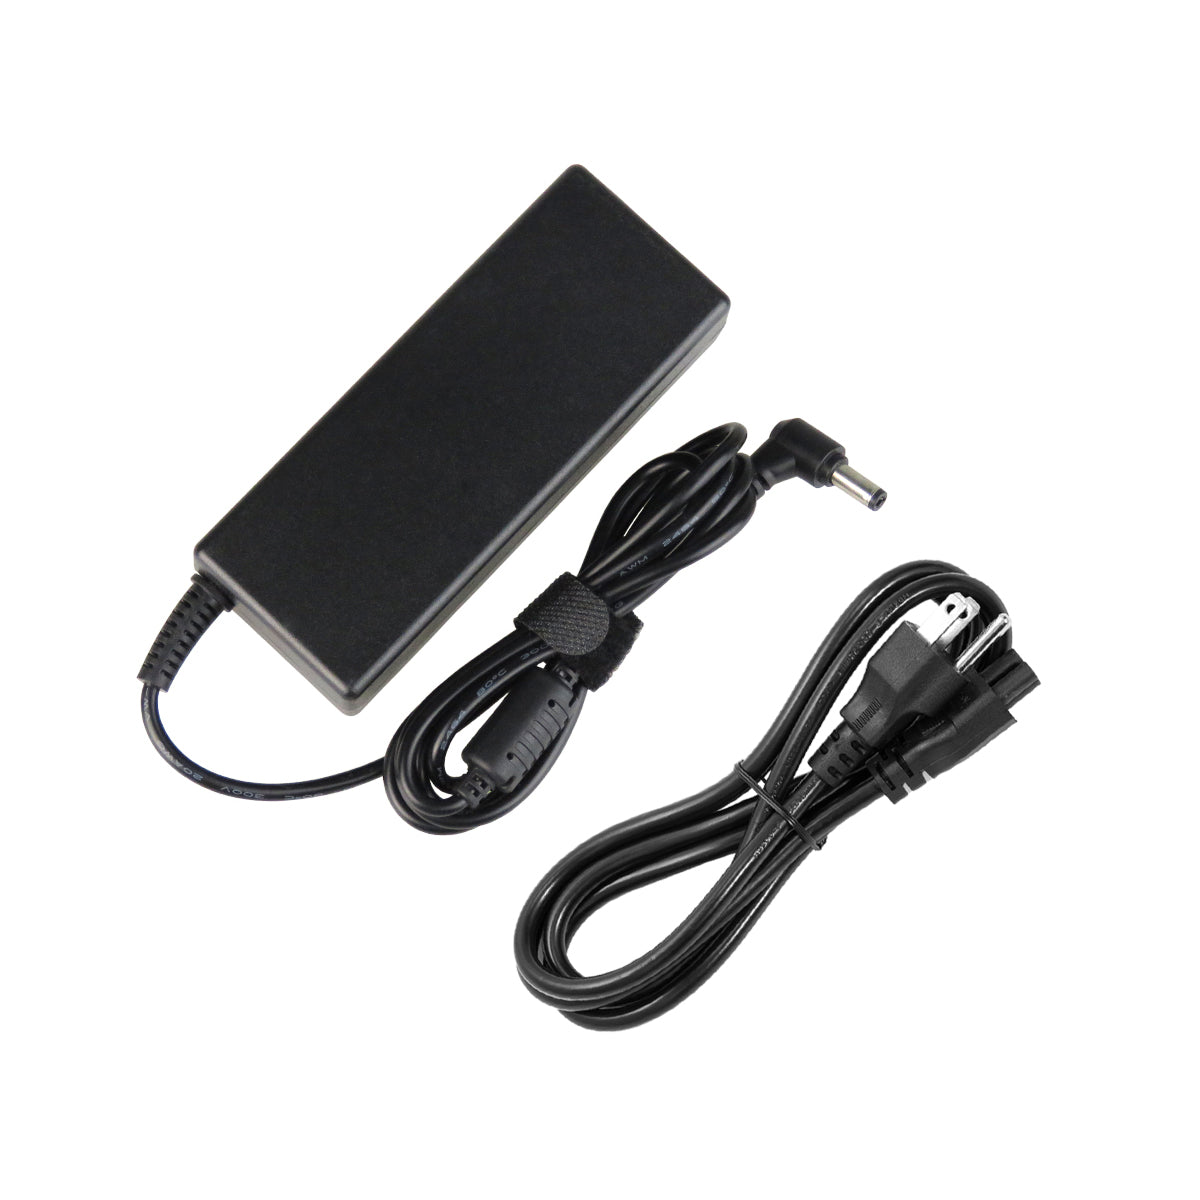 AC Adapter Charger for Gateway M285-E Notebook.